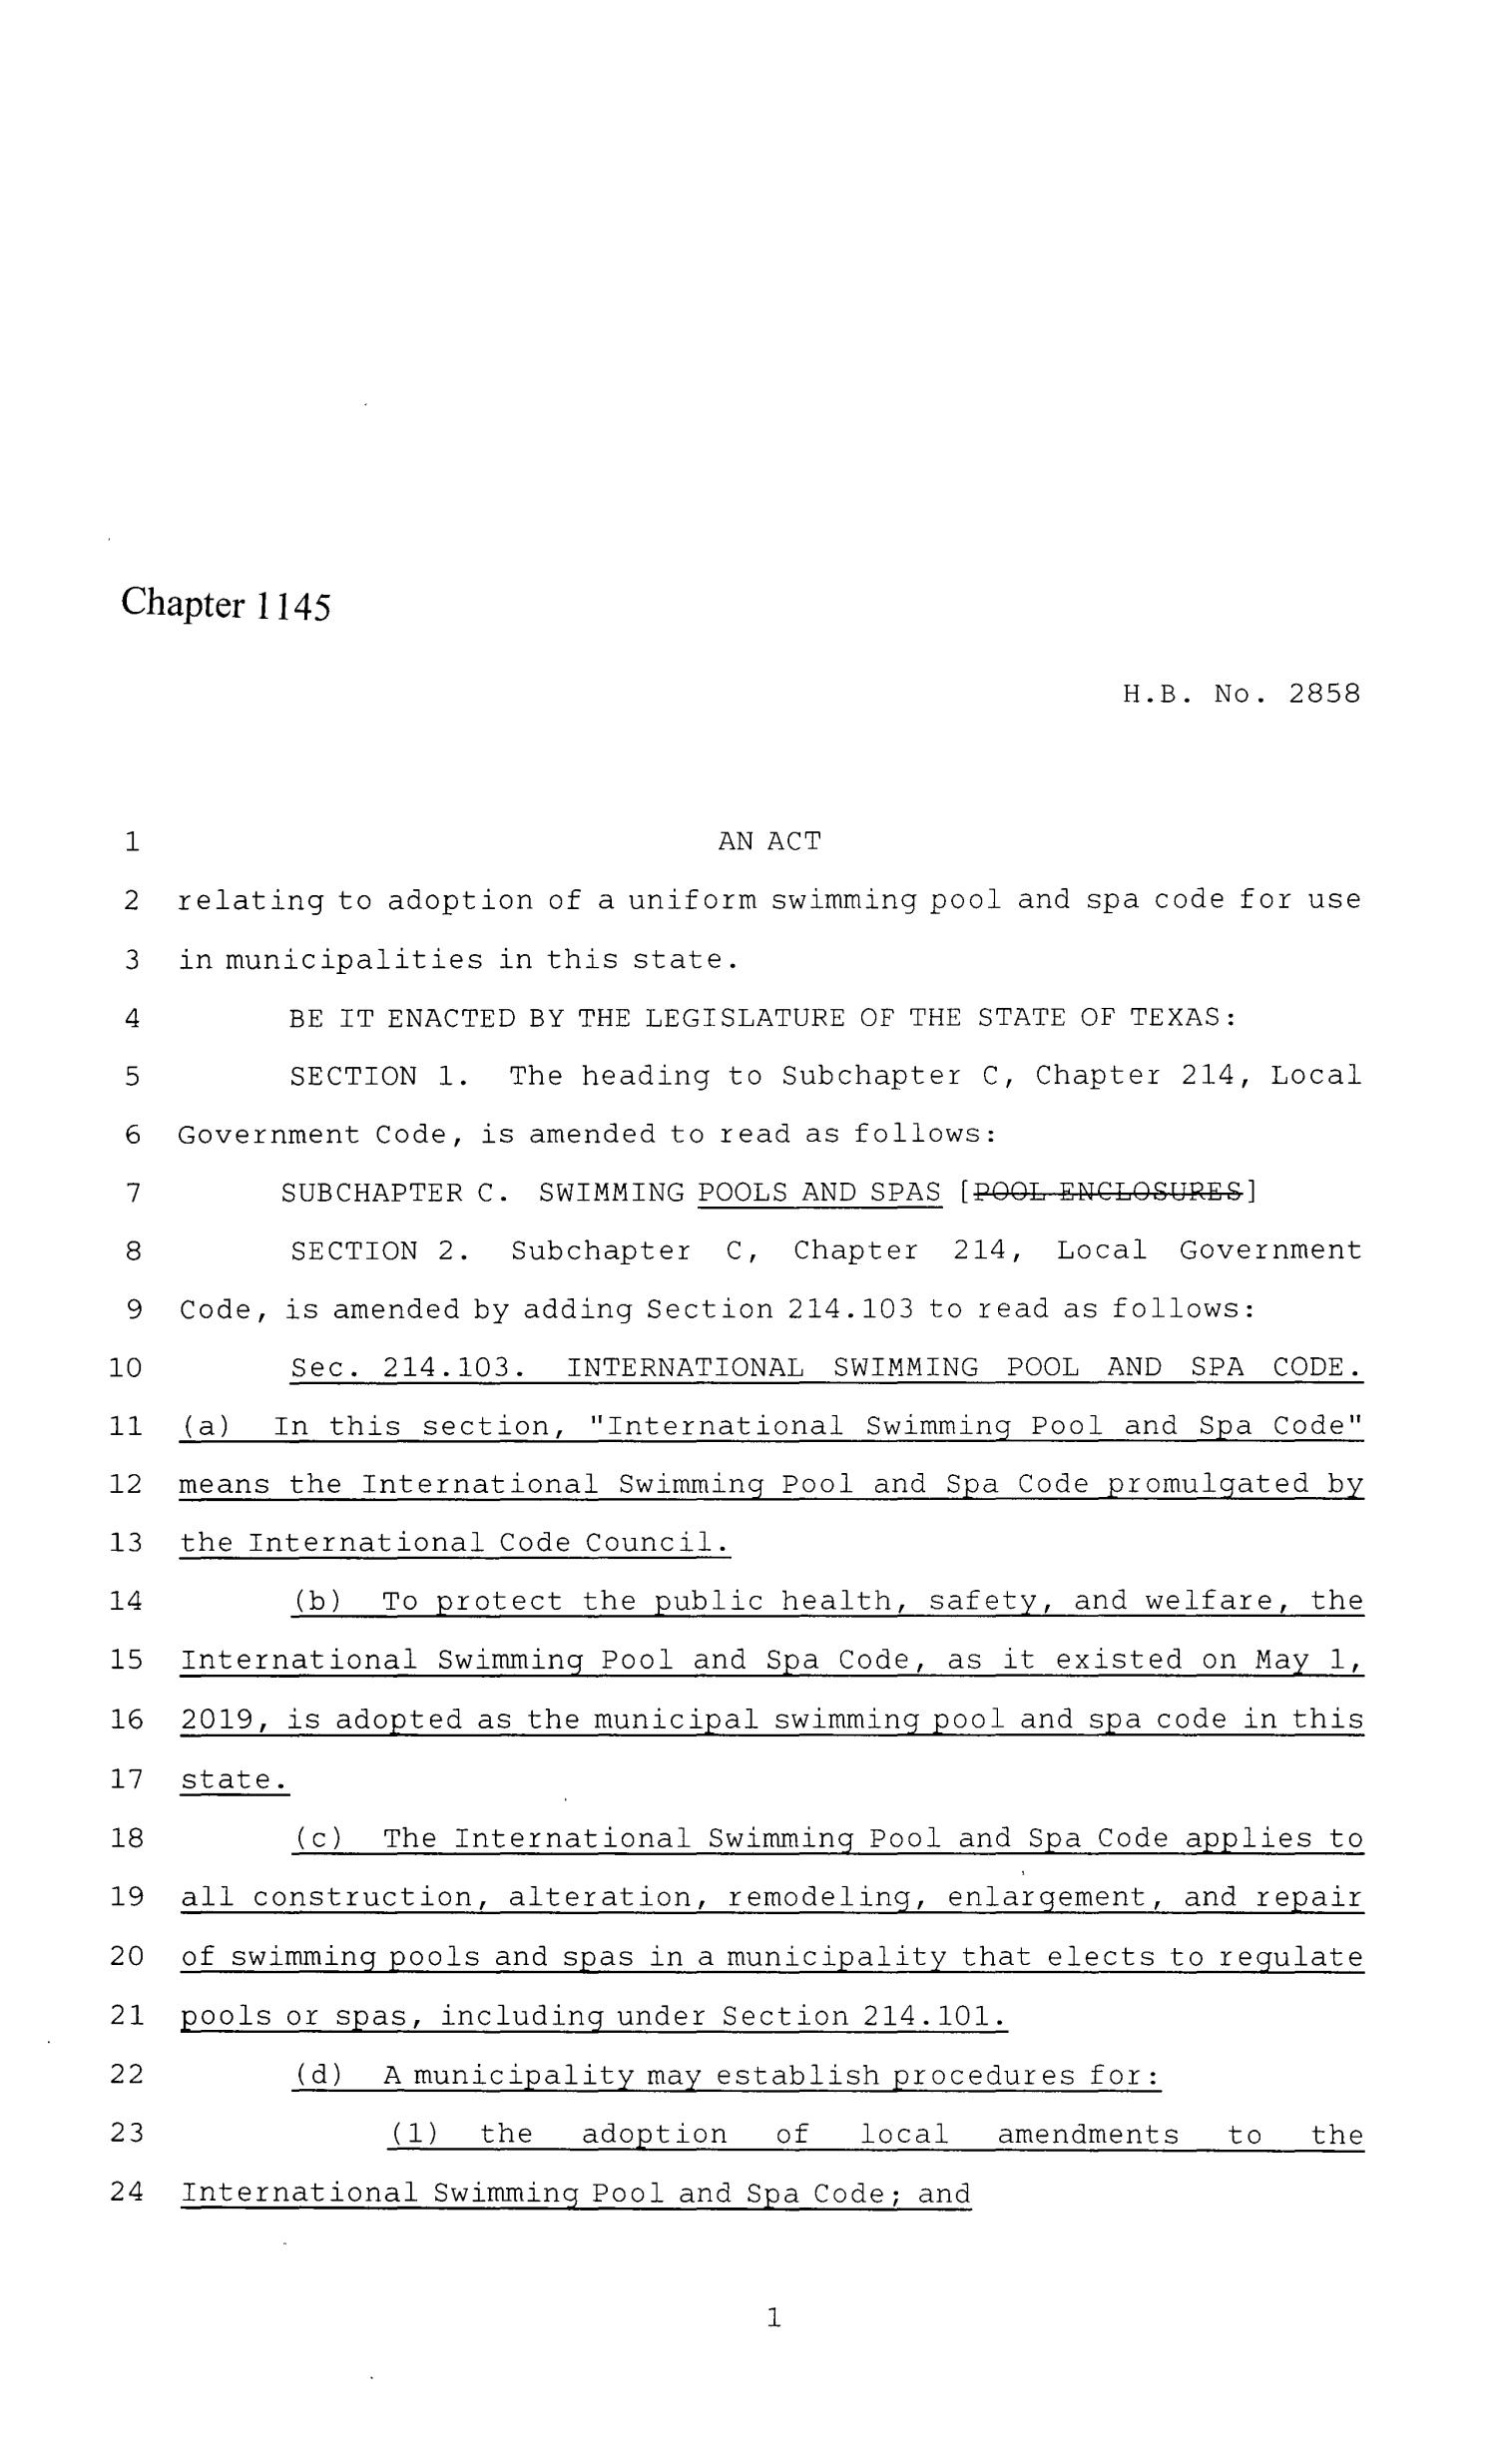 86th Texas Legislature, Regular Session, House Bill 2858, Chapter 1145
                                                
                                                    [Sequence #]: 1 of 4
                                                